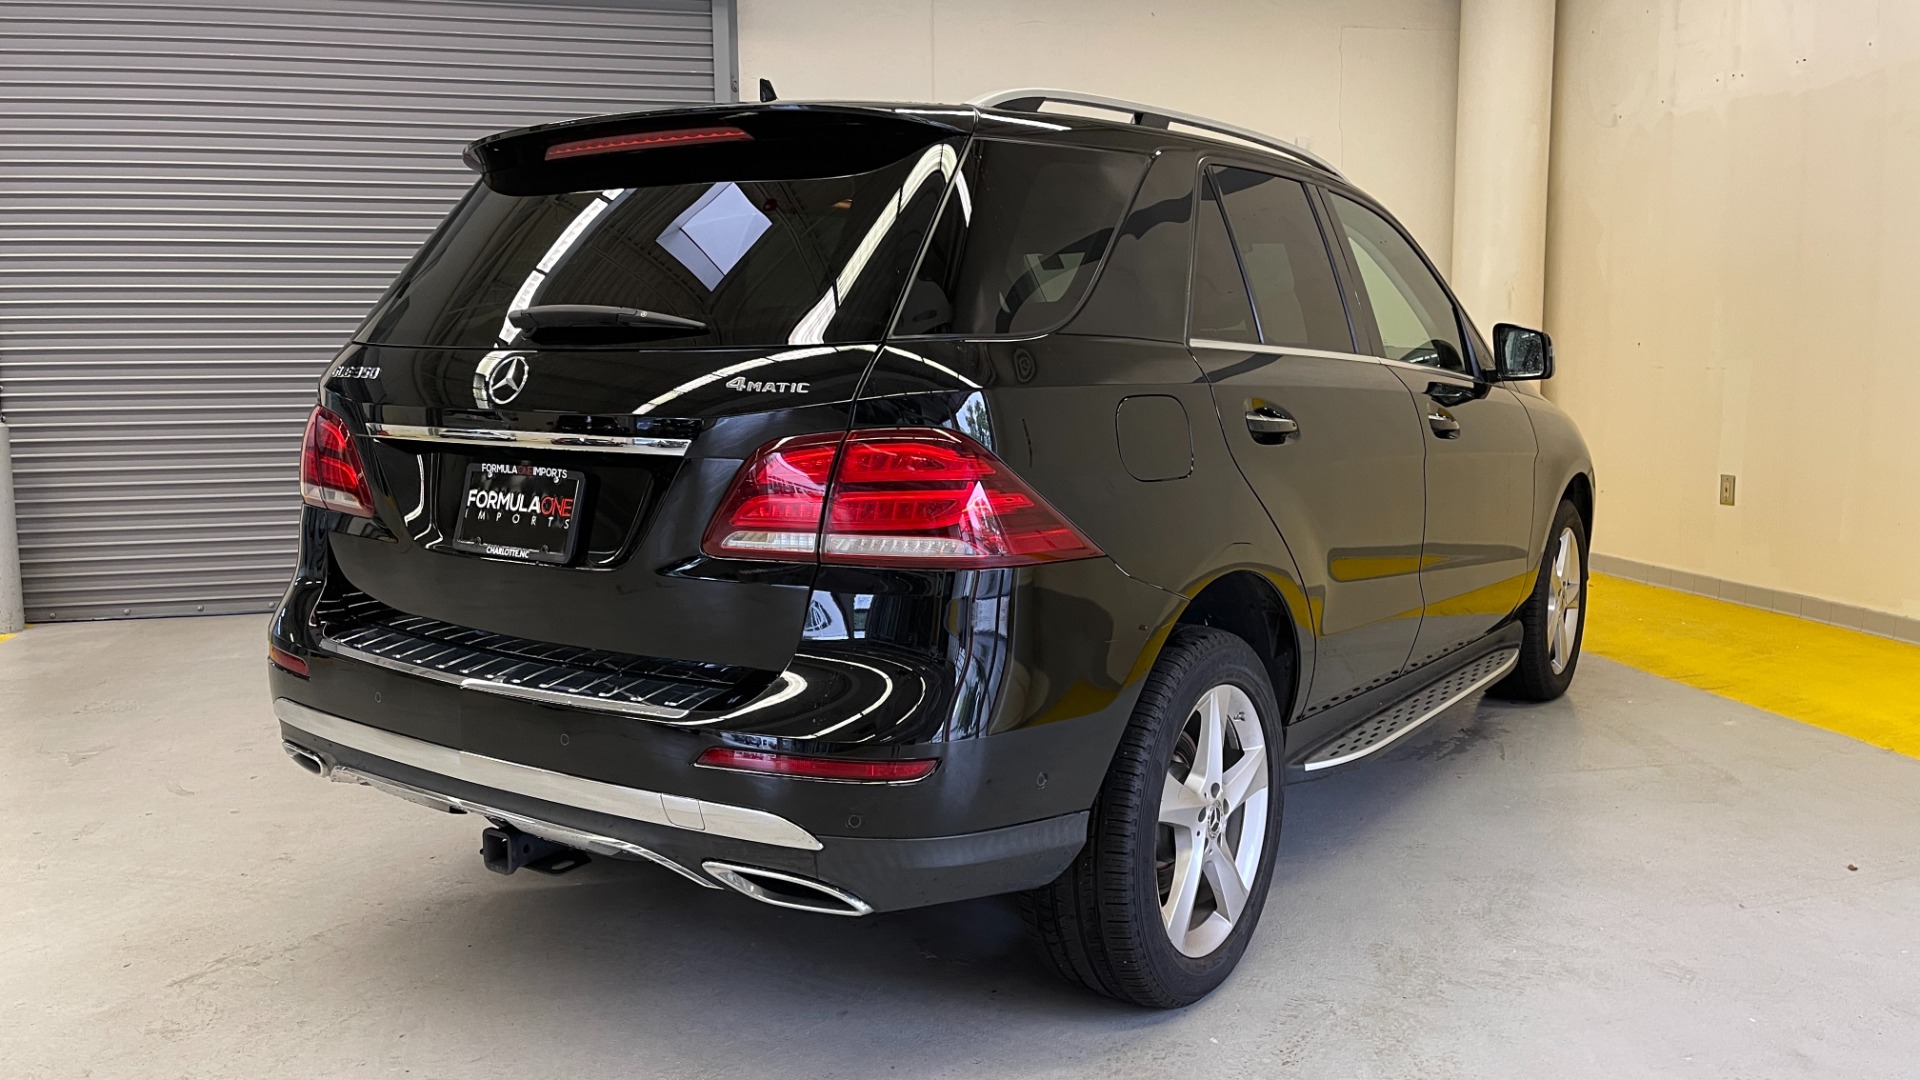 Used 2018 Mercedes-Benz GLE 350 4MATIC PREMIUM / NAV / PARK PILOT / BSA / H/K SND / SURROUND VIEW for sale Sold at Formula Imports in Charlotte NC 28227 7